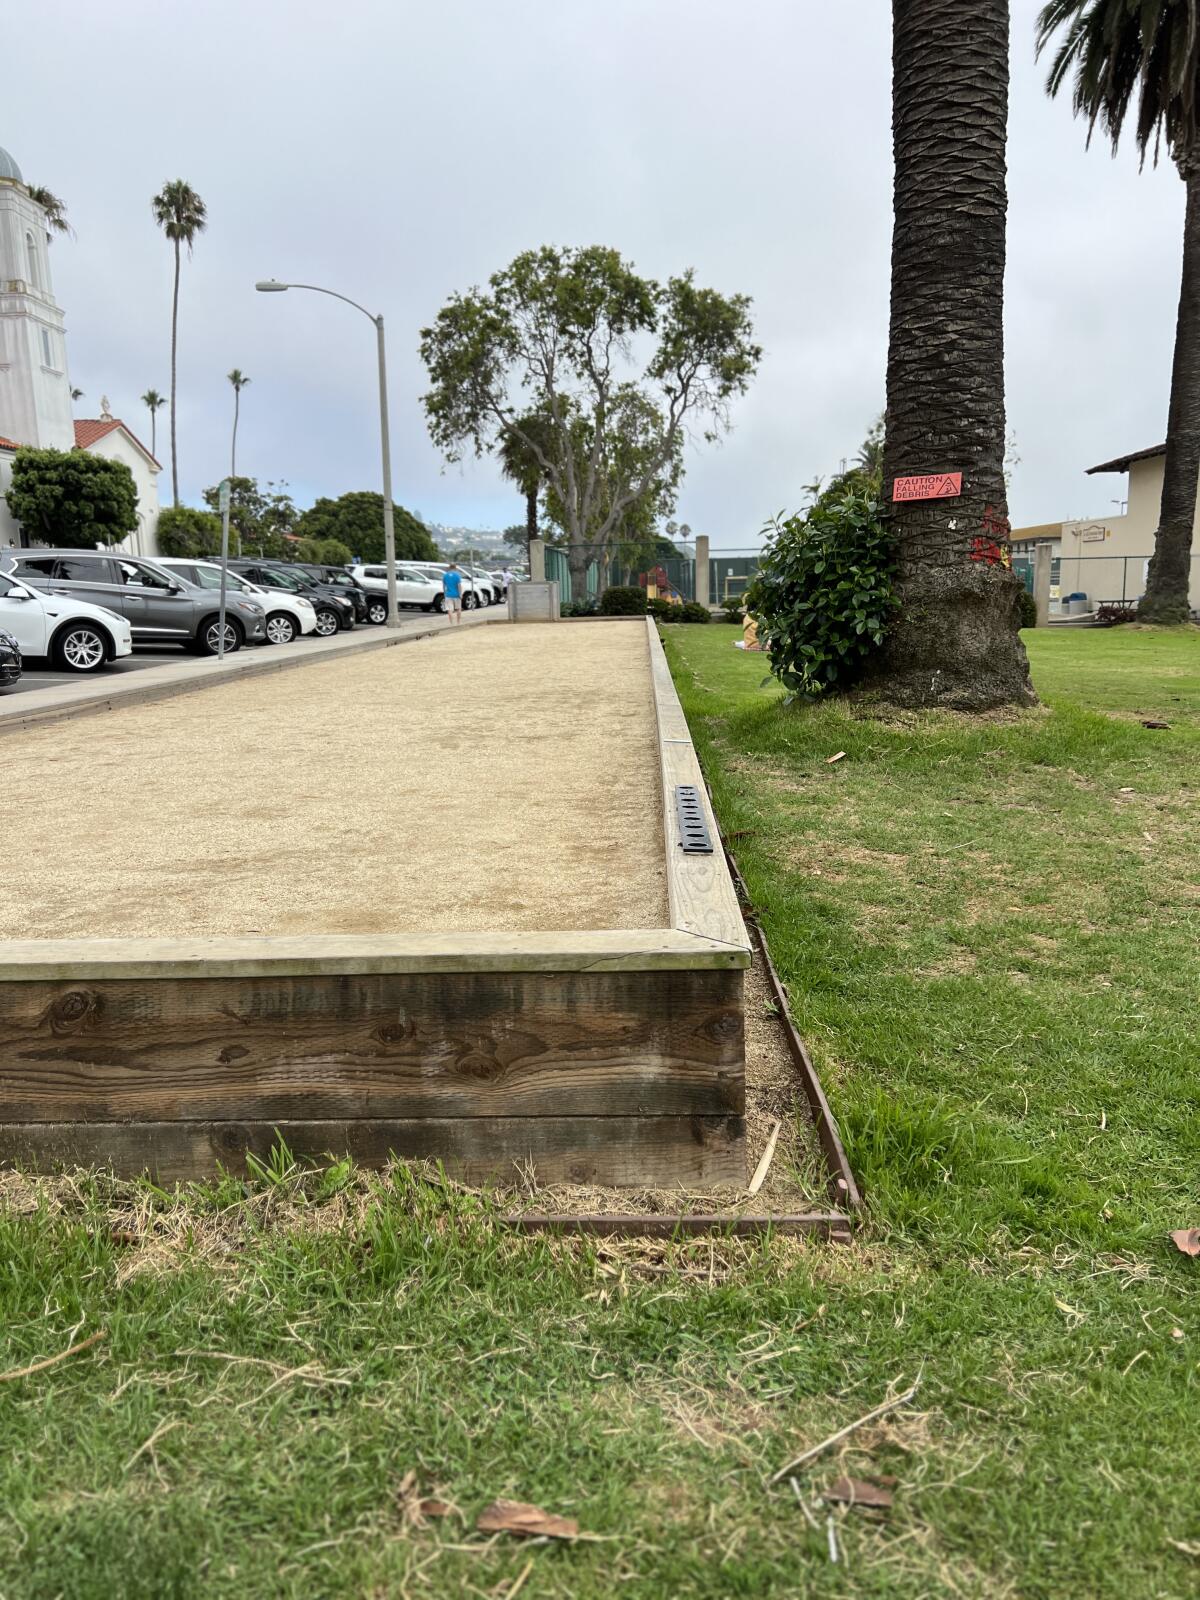 The west end of the bocce court at the La Jolla Recreation Center is still awaiting requested repairs.